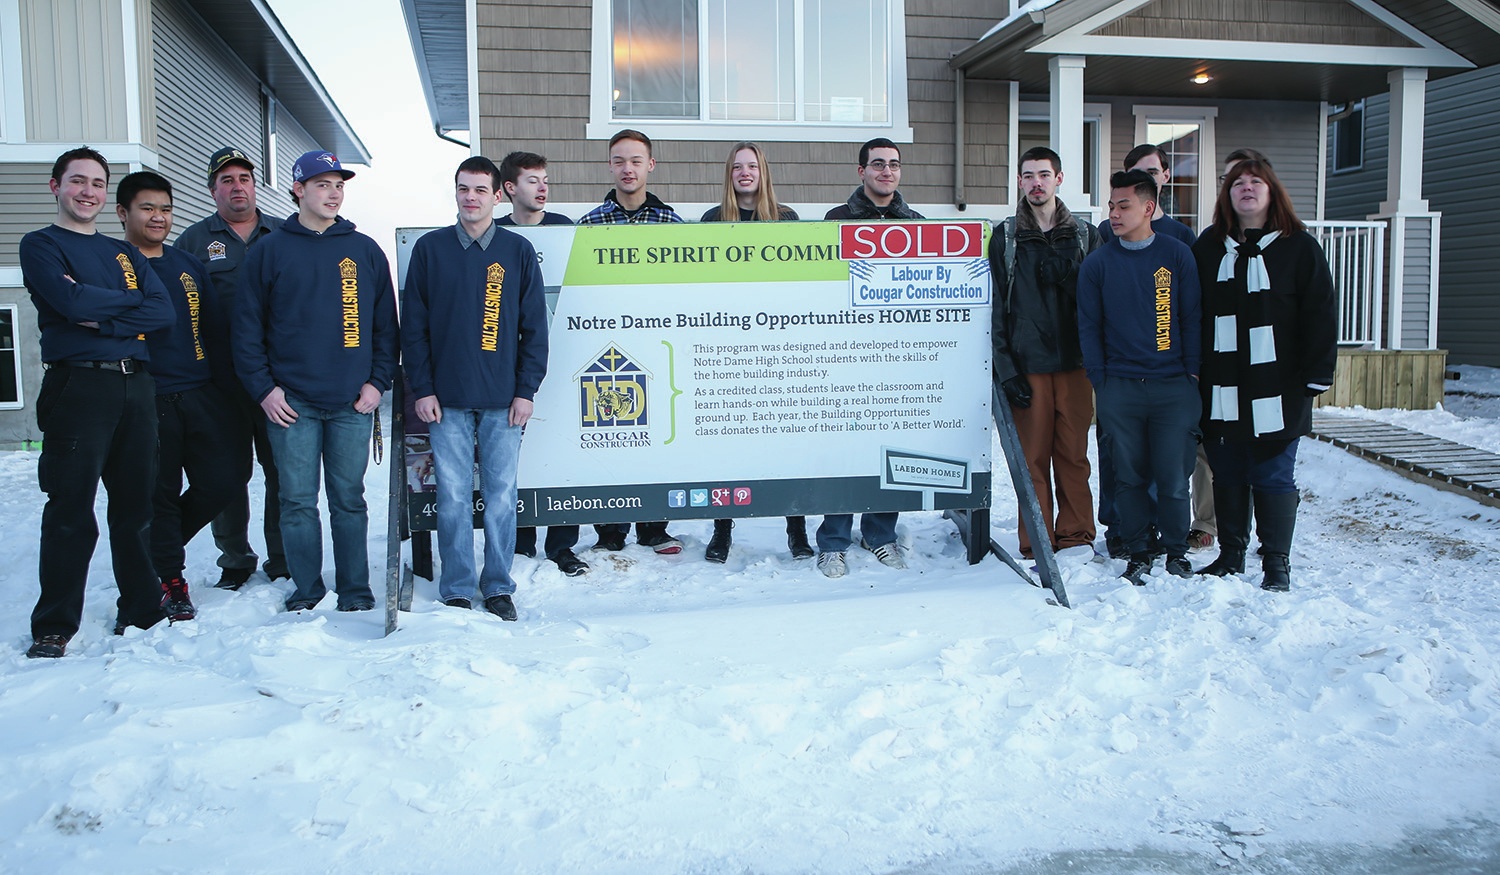 ACHIEVEMENT - Students from the Building Opportunities program at Notre Dame High School posed for a photo in front of the house they helped to build in Red Deer.